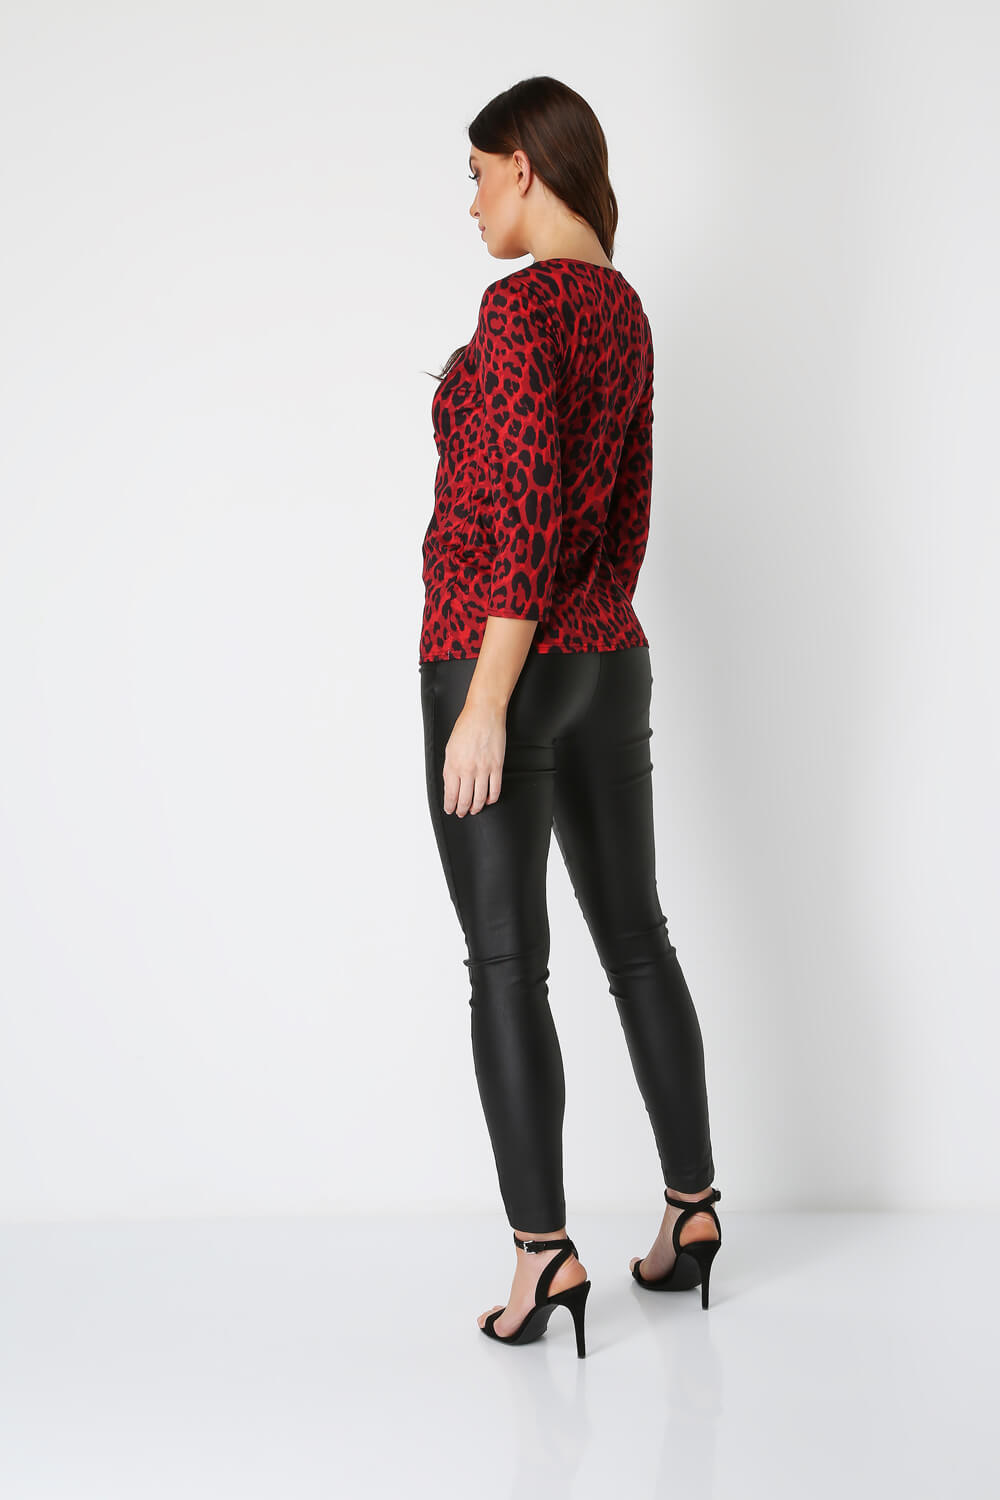 Red Leopard Print Tie Front Top, Image 3 of 4